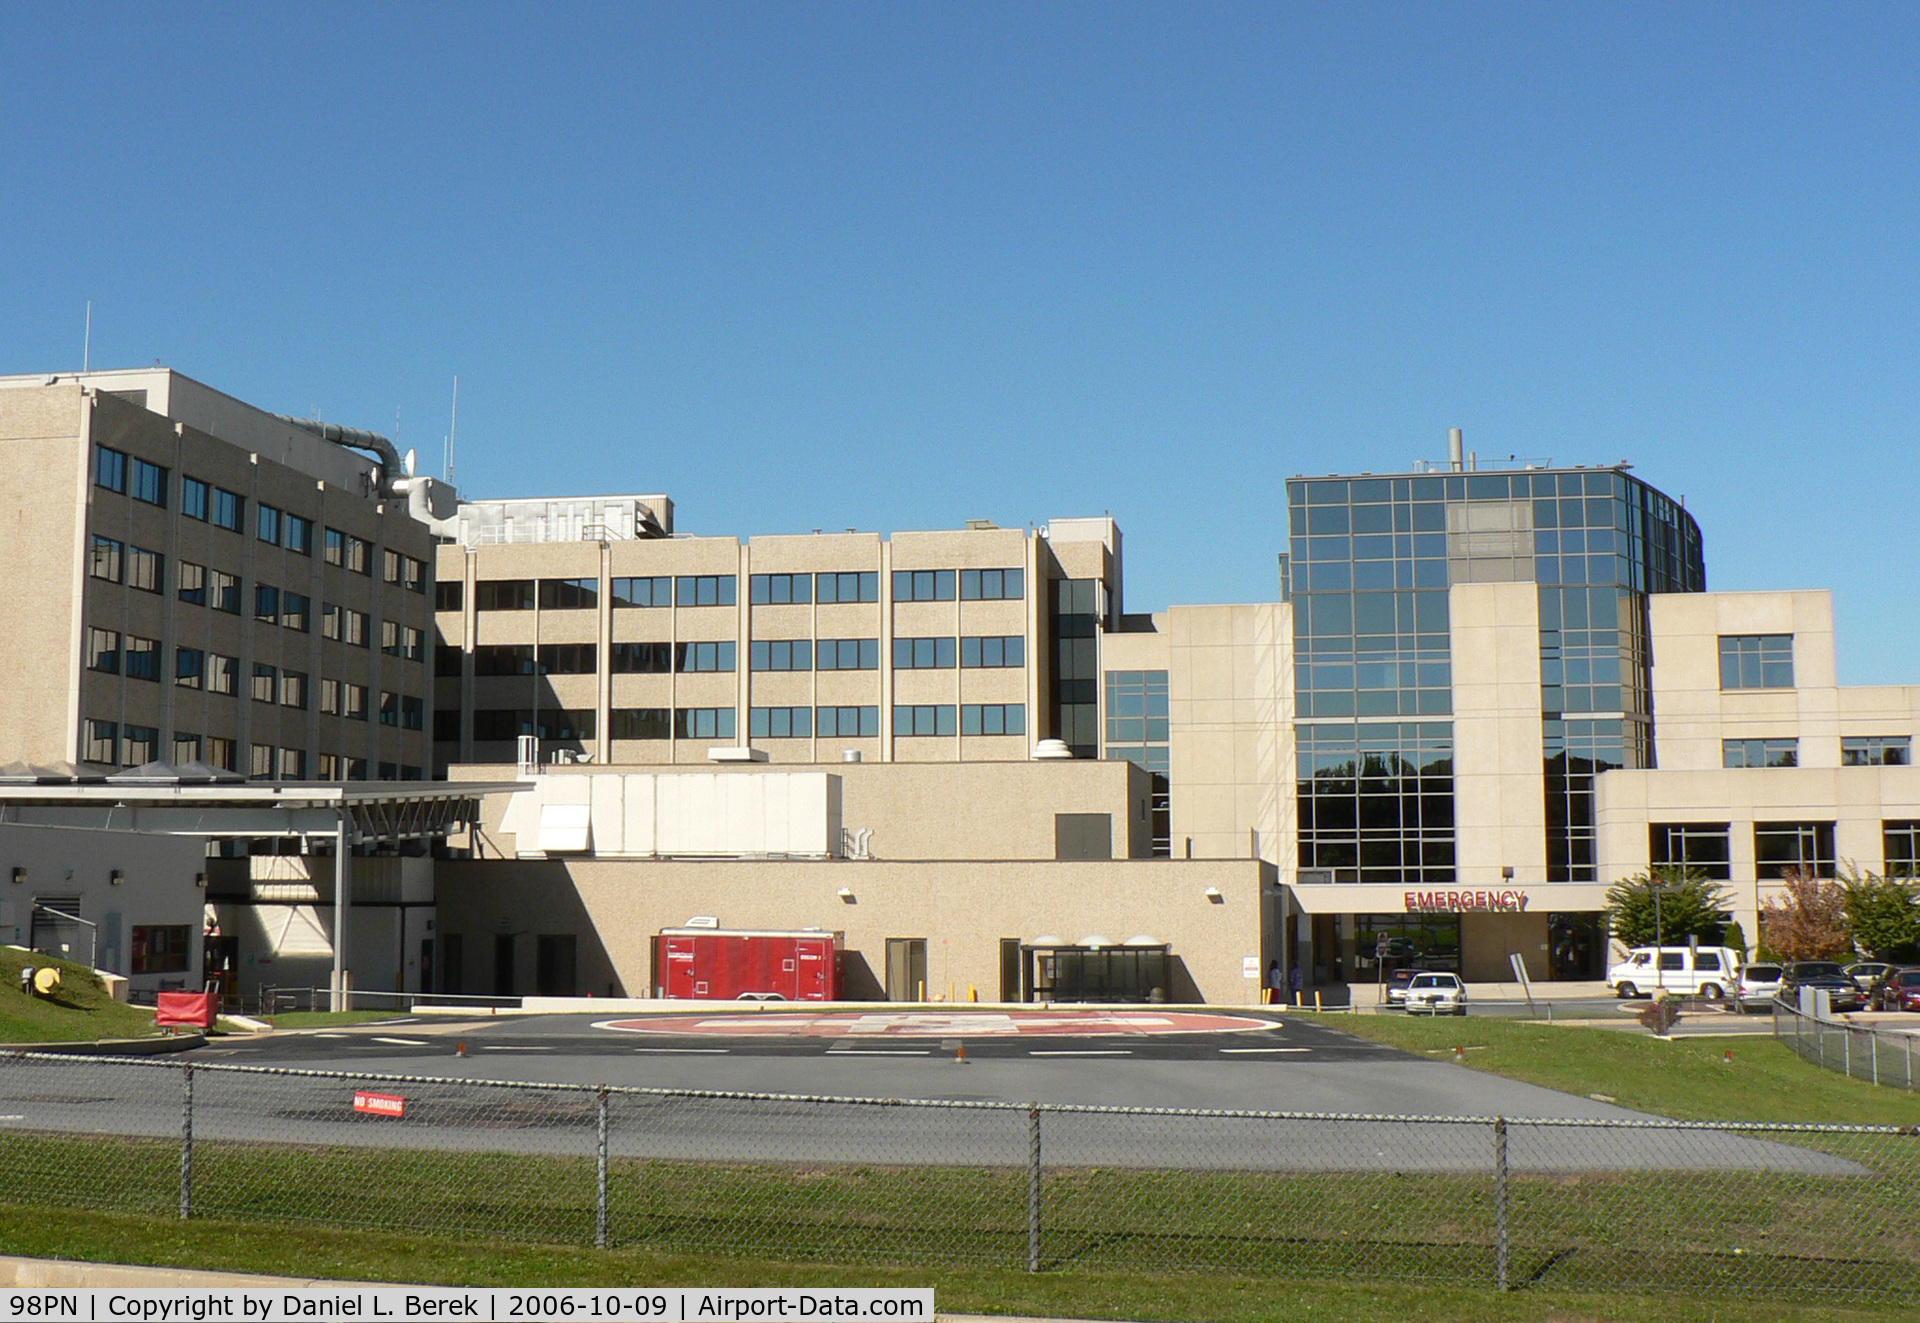 Trauma Center Heliport (98PN) - This is the heliport for the brand-new Cedar Crest trauma center, part of the Lehigh Valley Hospitals network.